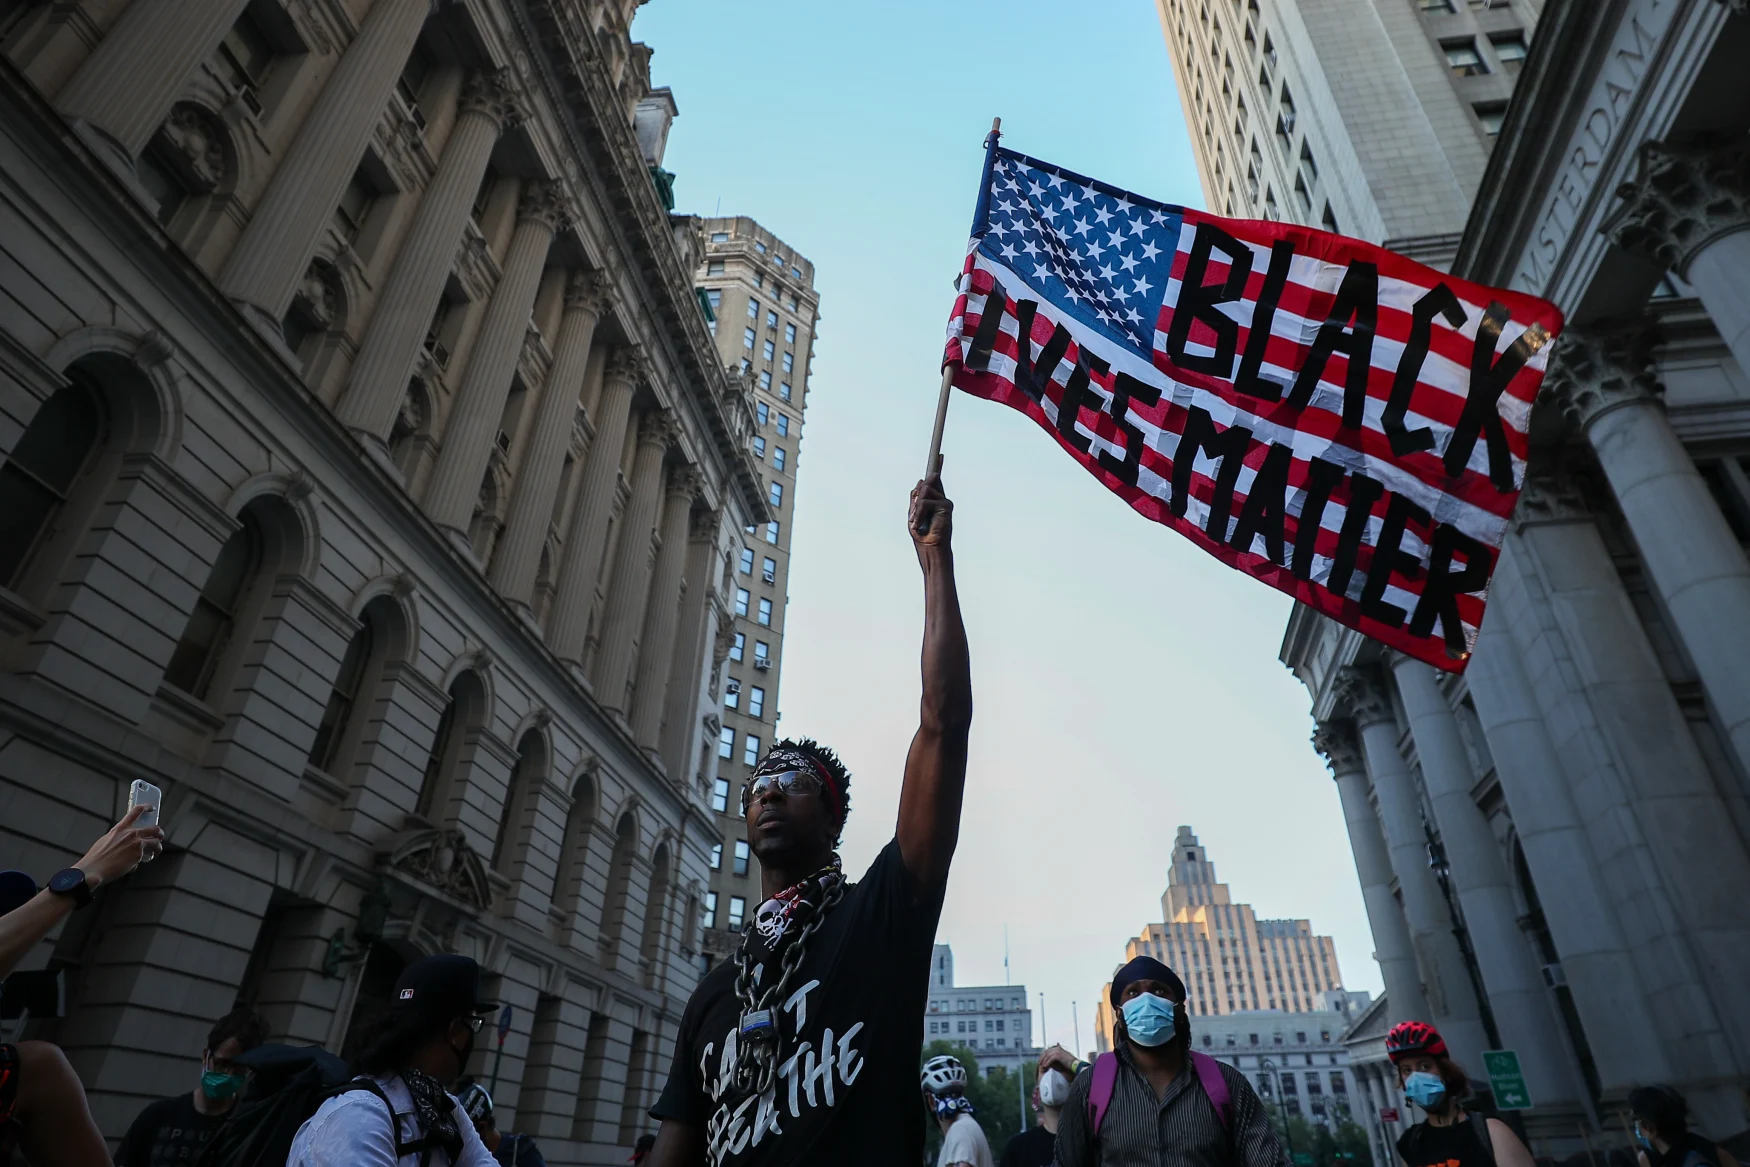 NEW YORK, USA - JUNE 23: A man waves a U.S flag reading 'Black Lives Matter' during an anti-racism protest in New York City, United States on June 23, 2020. The protestors have occupied the City Hall Park in New York City after marching around the City Hall and One Police Plaza. (Photo by Tayfun Coskun/Anadolu Agency via Getty Images)